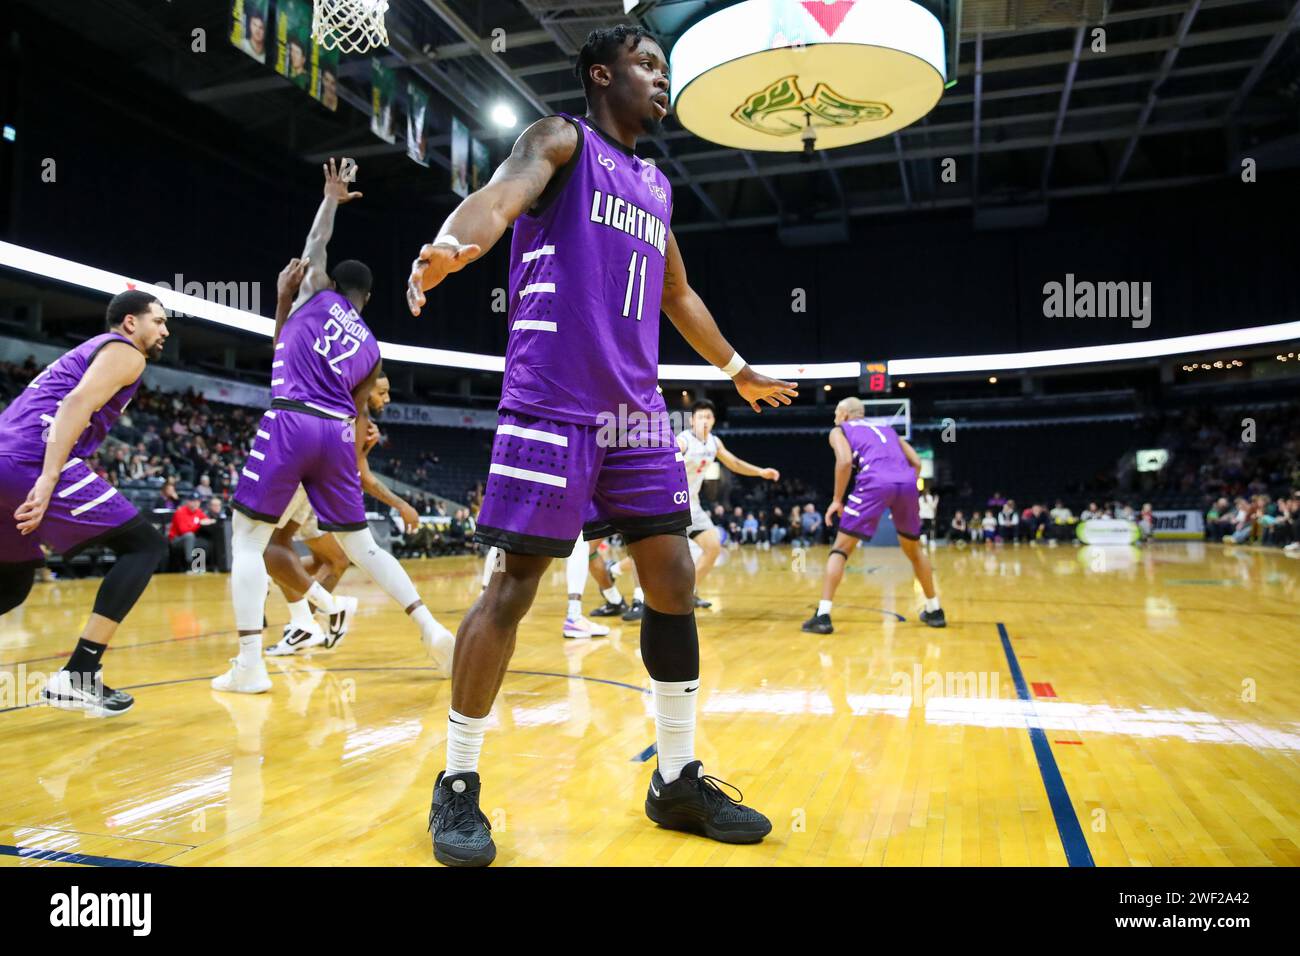 London, Canada. 27th Jan, 2024. London Ontario Canada, Jan 27 2024. The London Lightning defeat the Tri-State Admirals on their first visit to Canada.Mike Nuga(11) of the London Lightning. Credit: Luke Durda/Alamy Live News Stock Photo